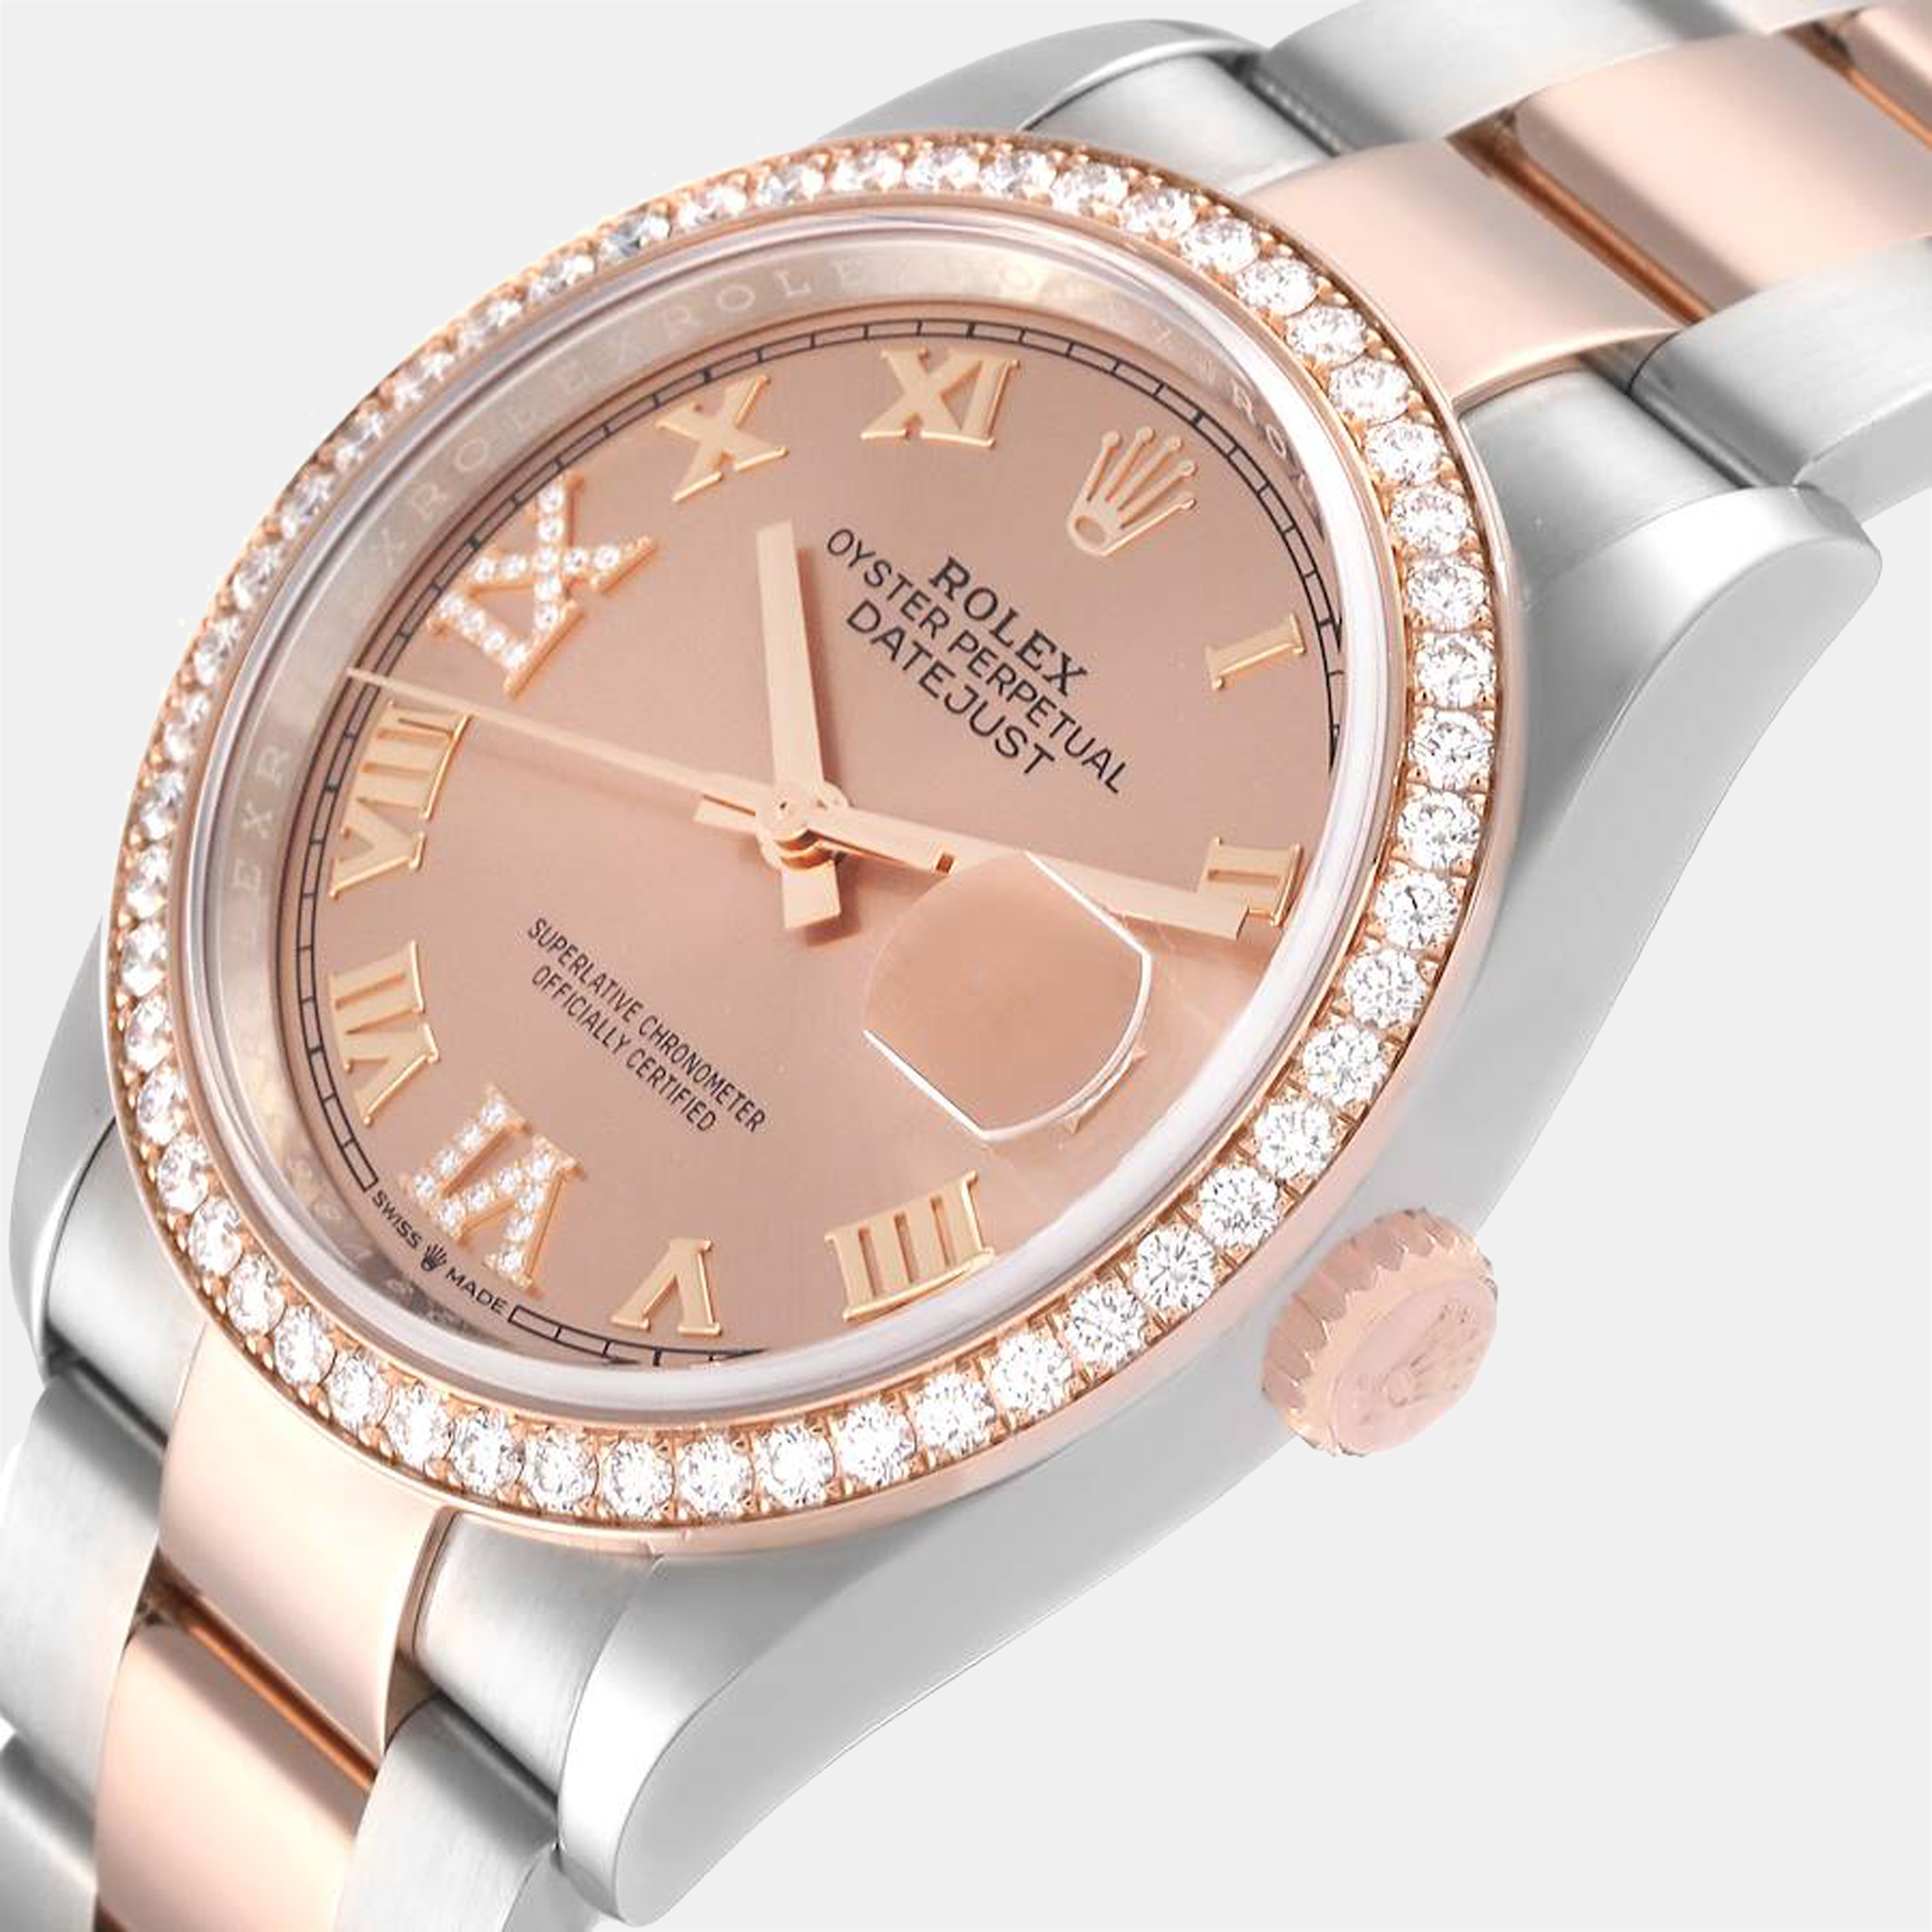 

Rolex Pink Diamonds 18K Rose Gold And Stainless Steel Datejust 126281 Automatic Men's Wristwatch 36 mm